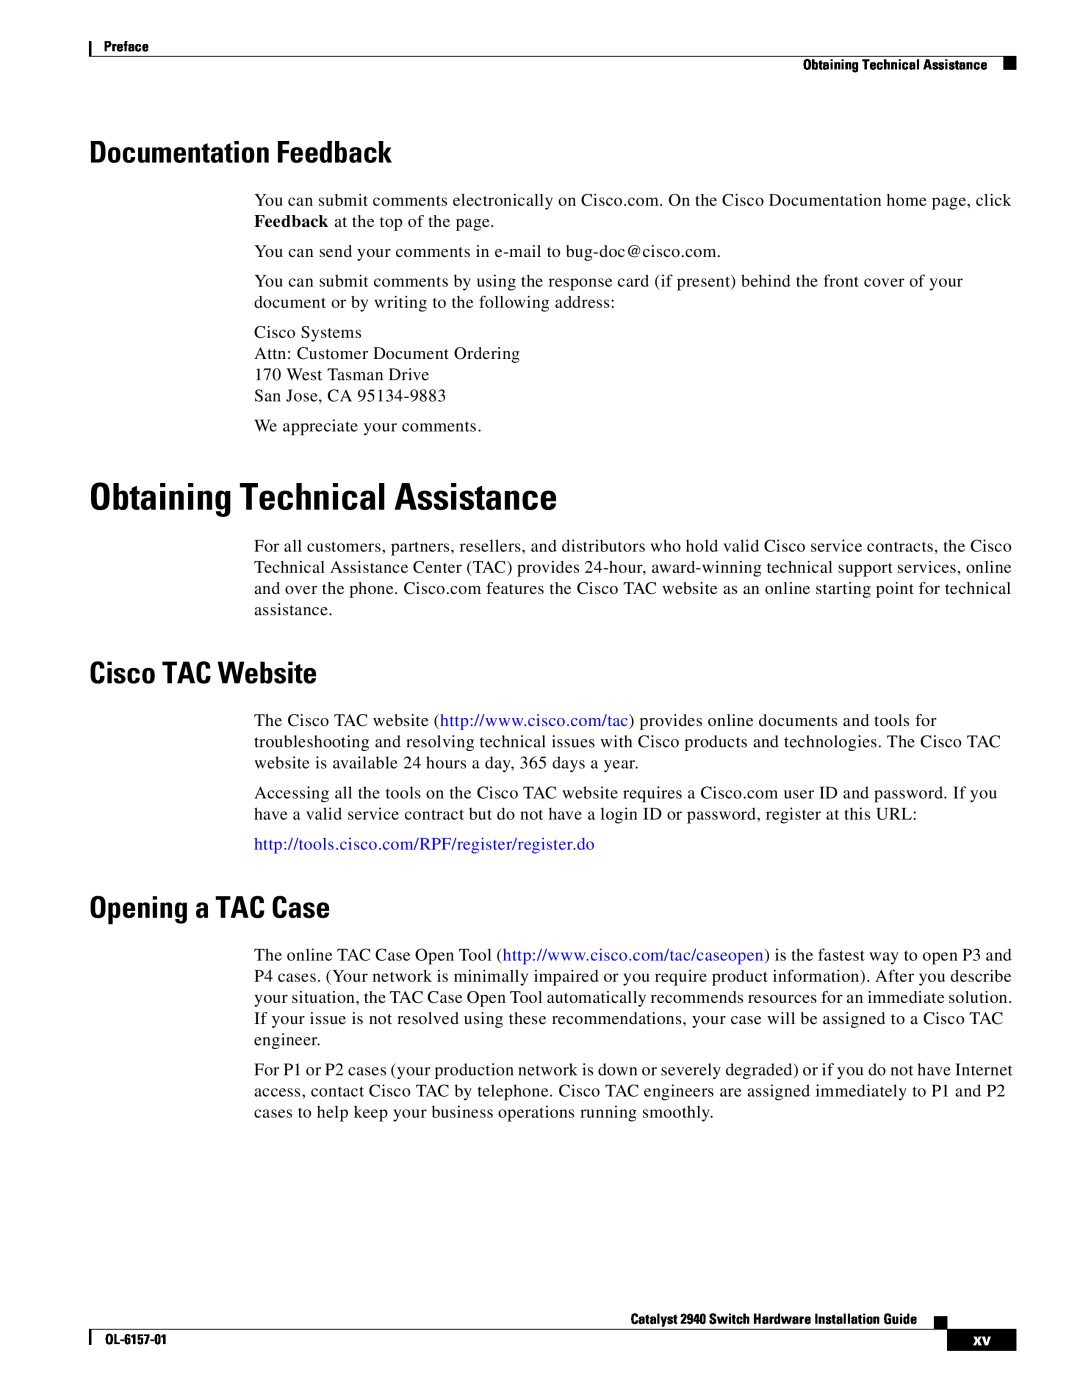 Cisco Systems OL-6157-01 Obtaining Technical Assistance, Documentation Feedback, Cisco TAC Website, Opening a TAC Case 